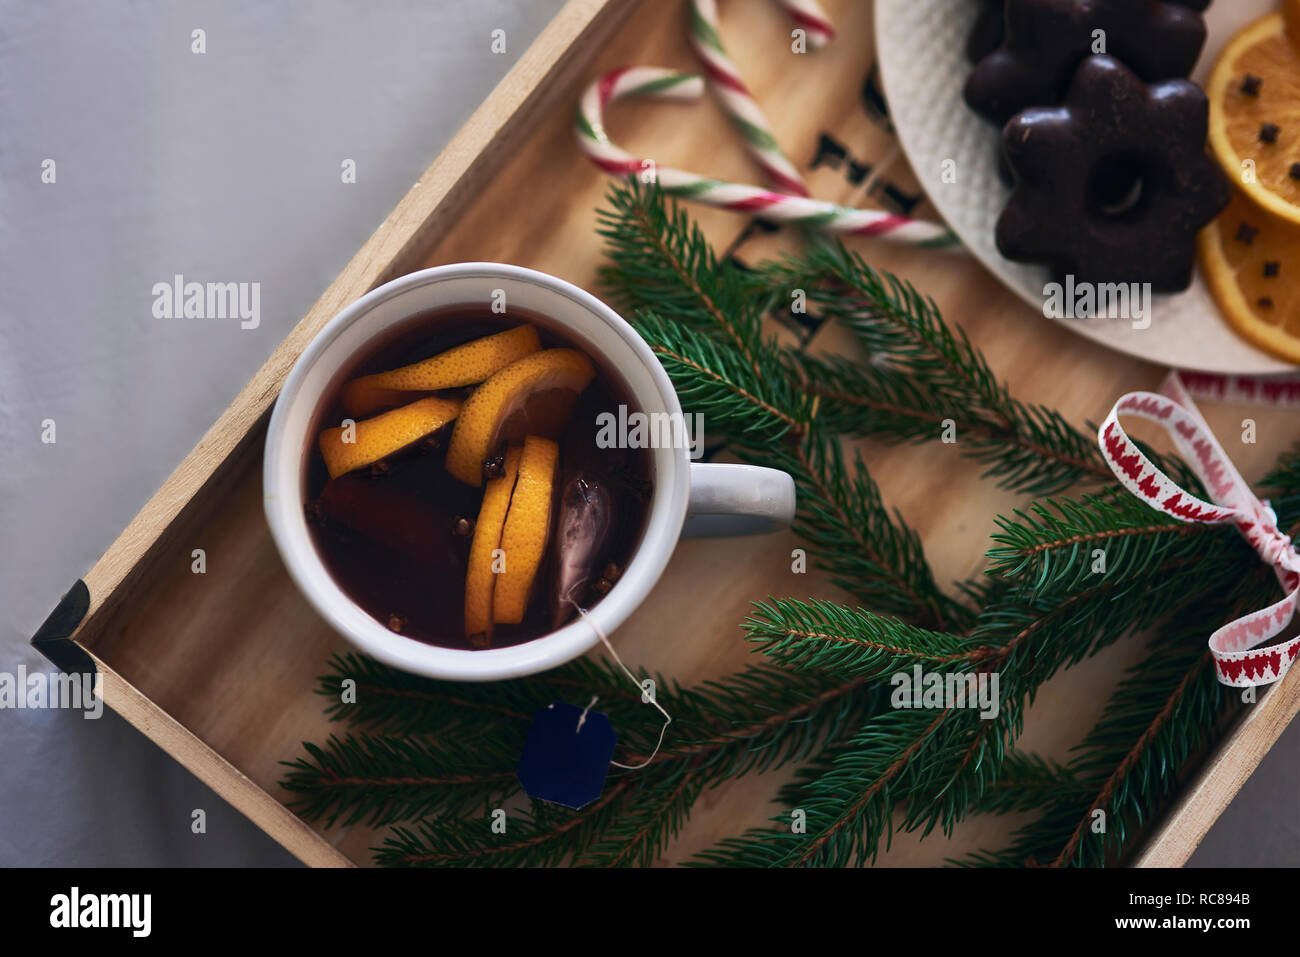 Festive tray of warm drink, Christmas biscuits and Yew tree branch Stock Photo